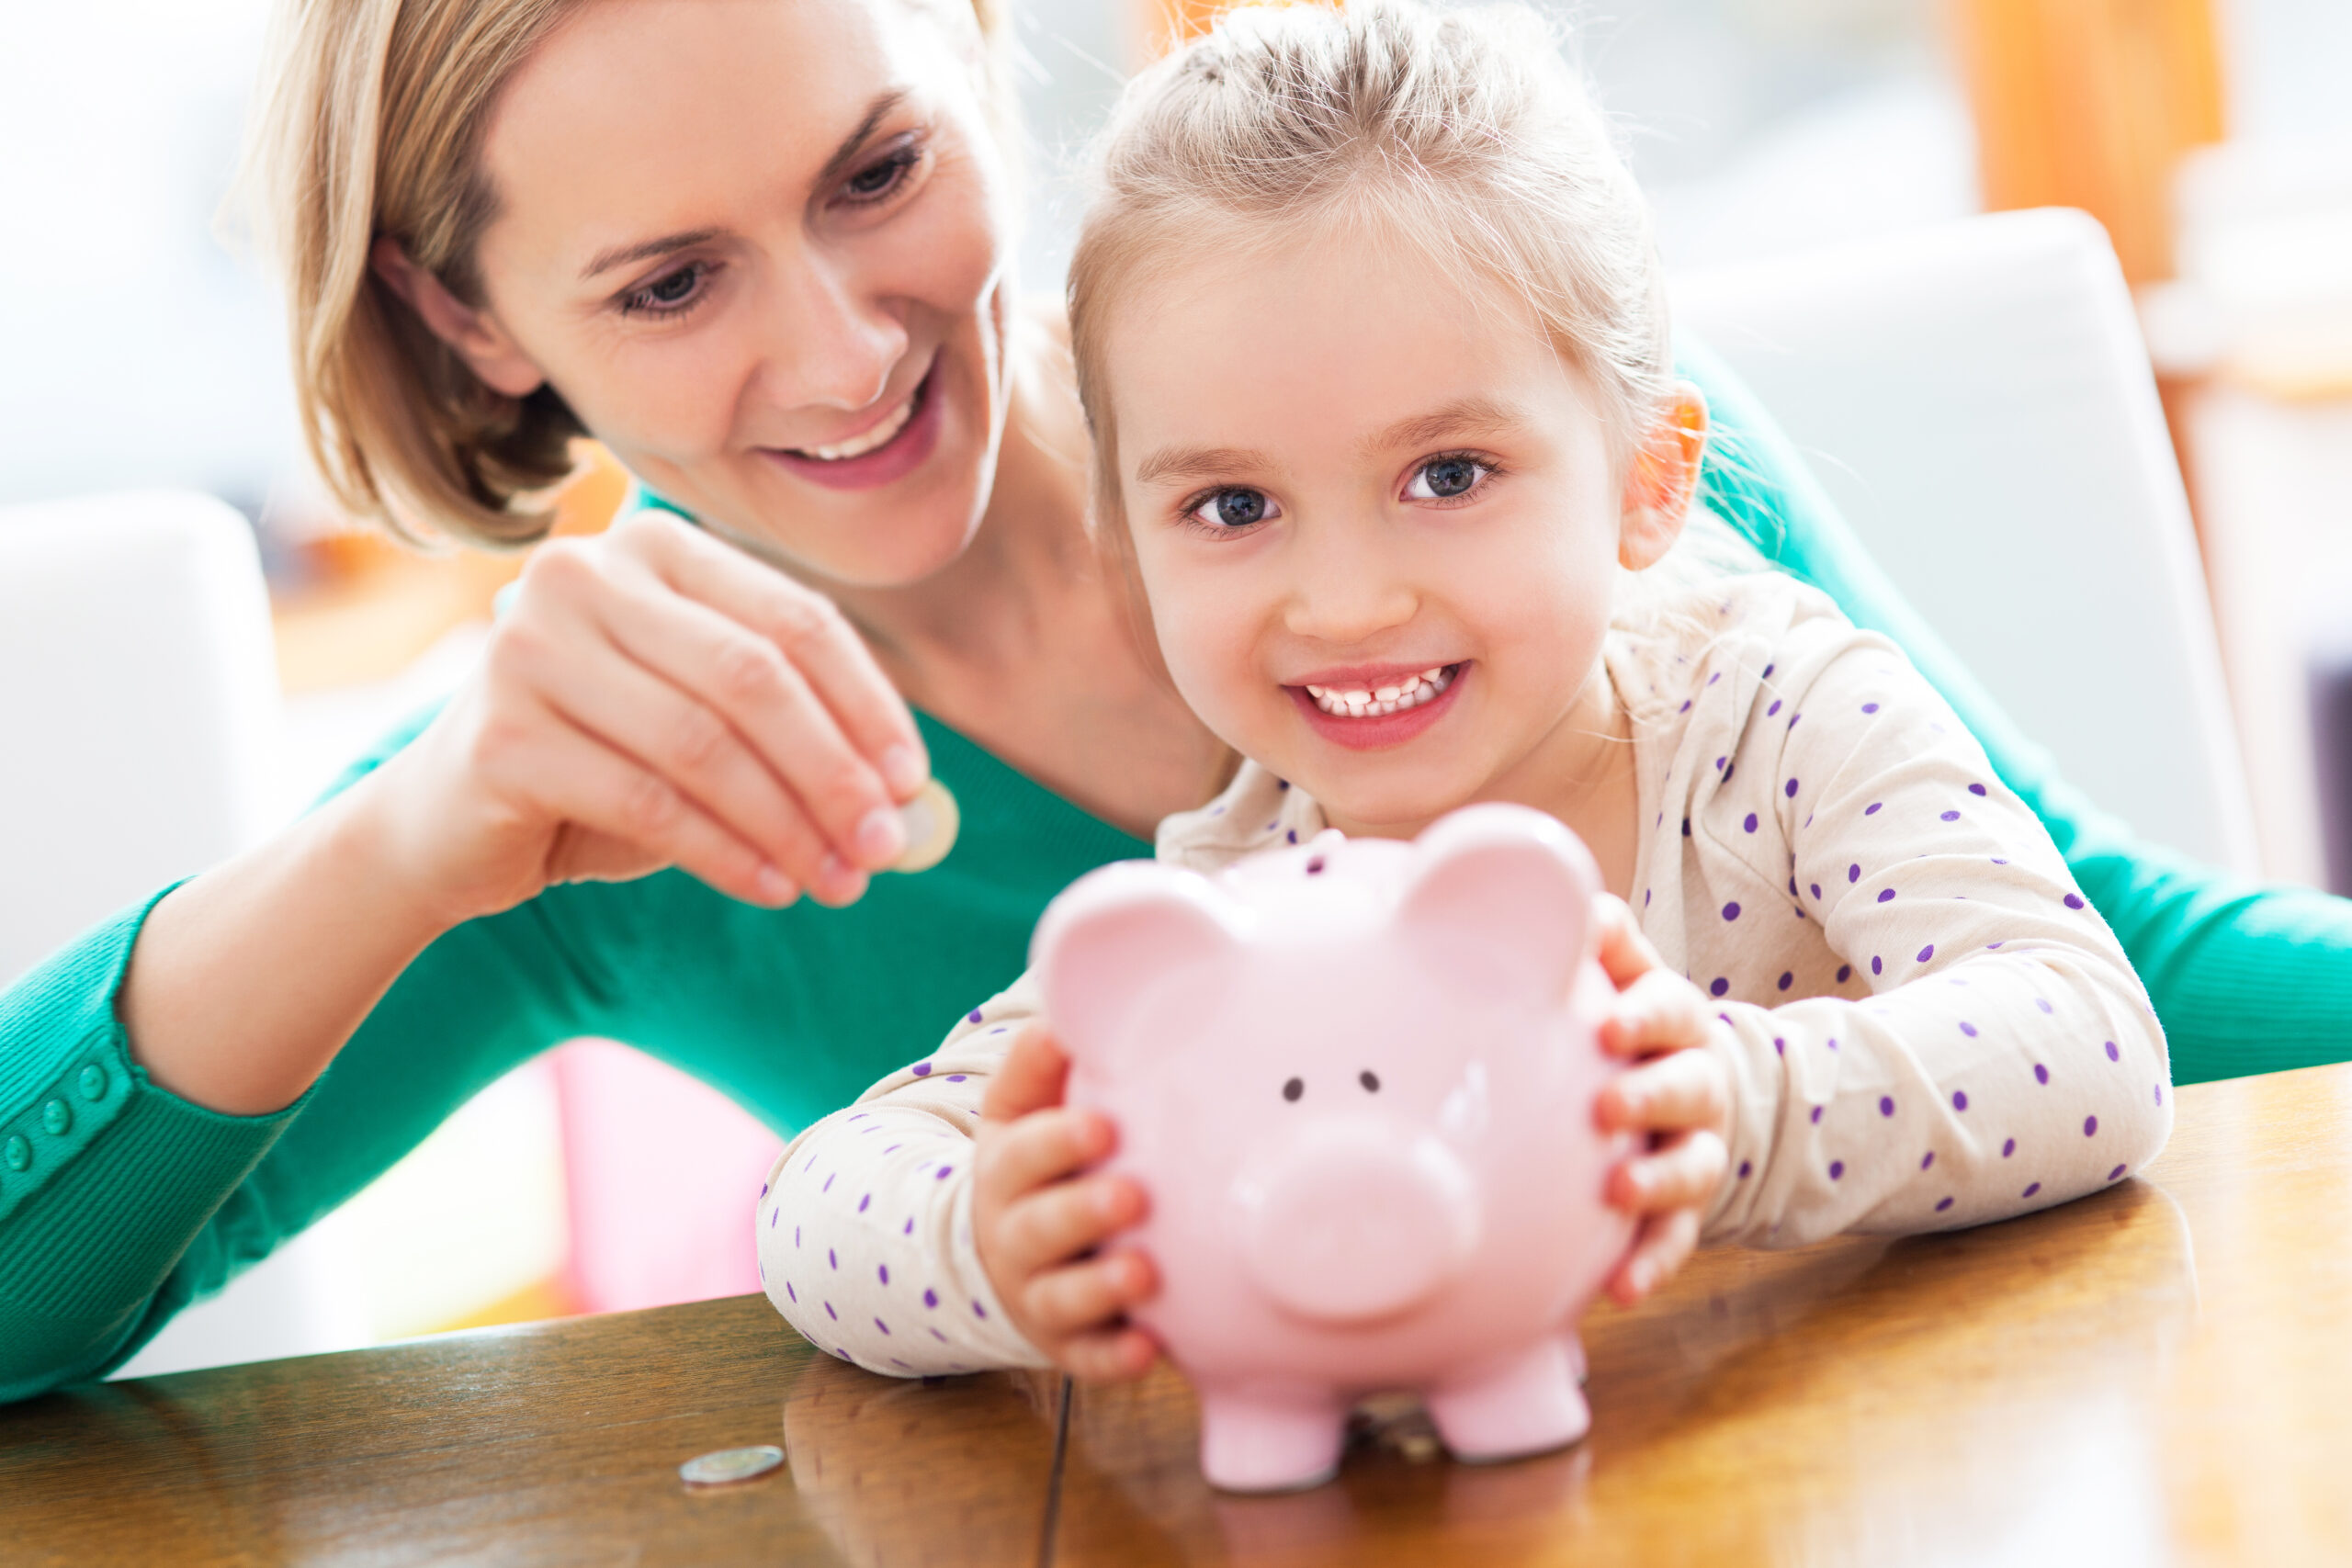 A mother helping her young daughter put coins in a piggy bank.